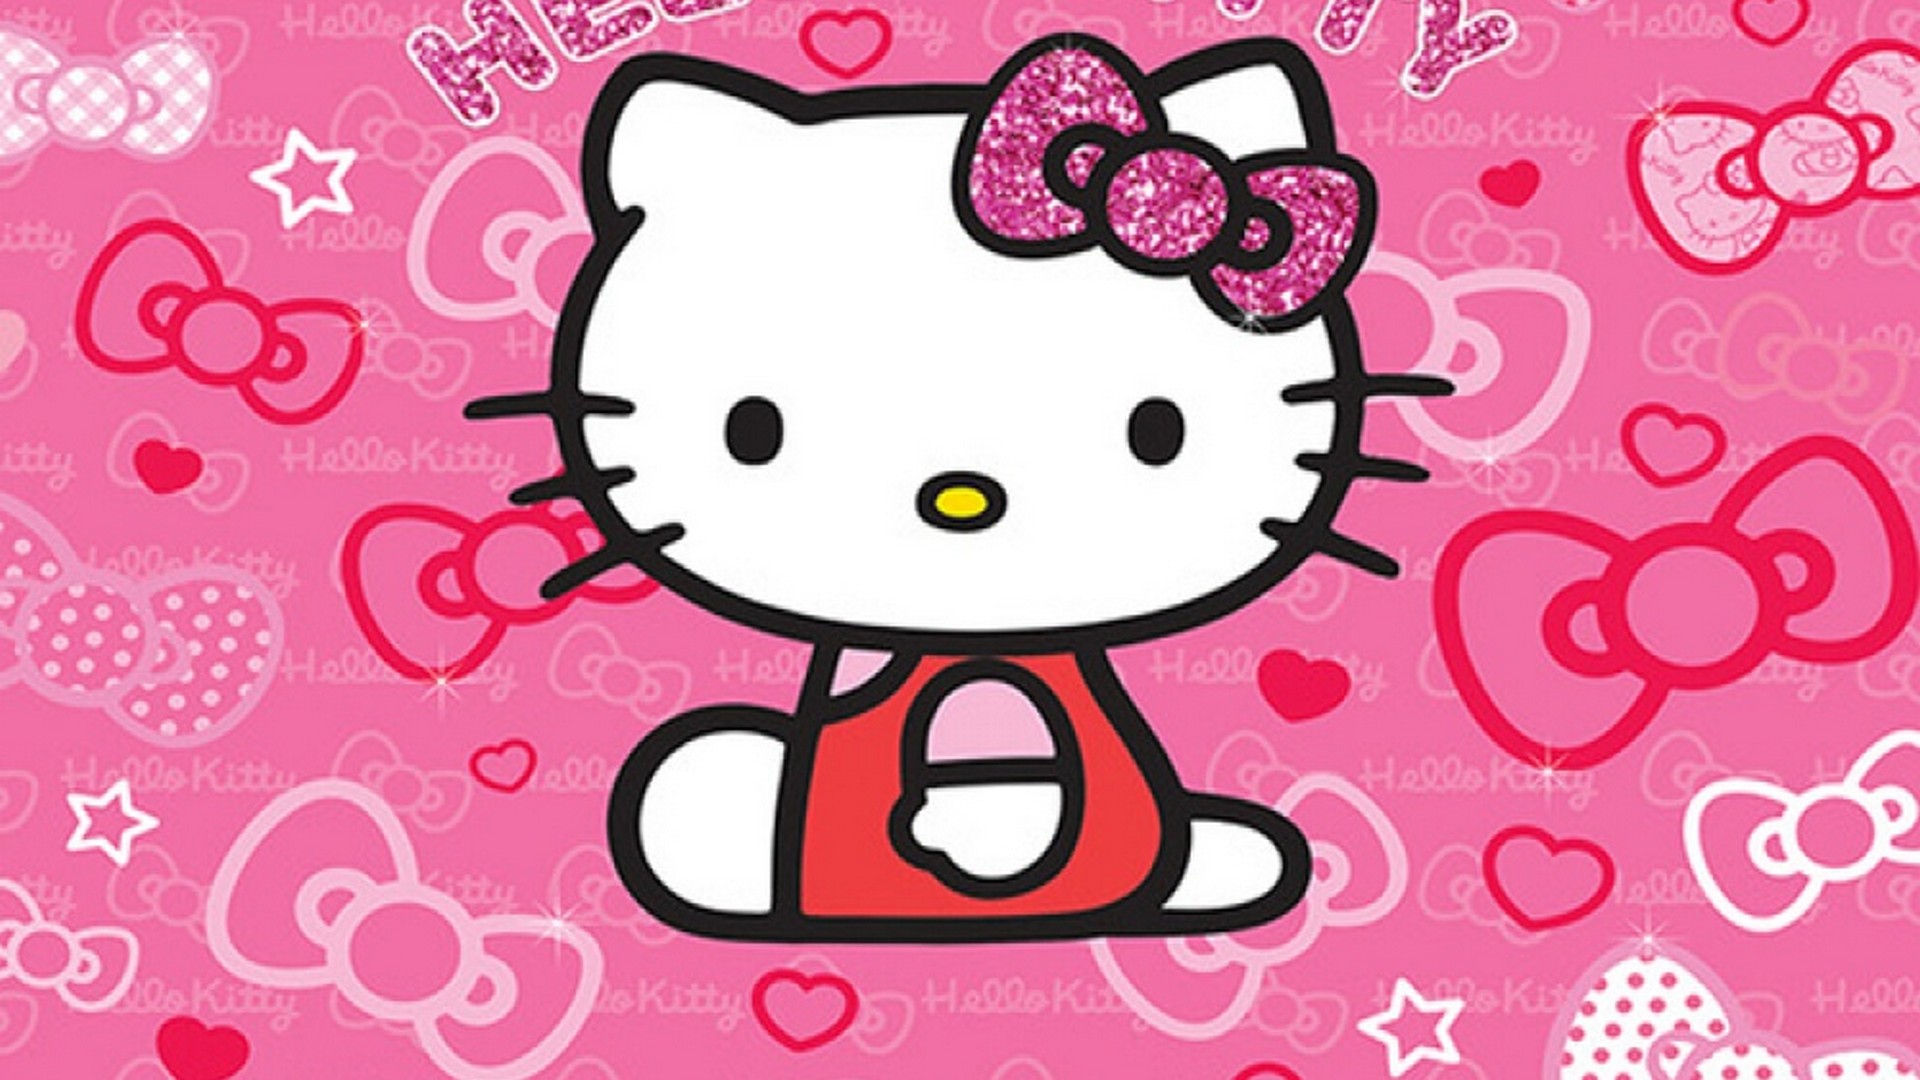 Wallpaper Sanrio Hello Kitty Desktop with resolution 1920X1080 pixel. You can use this wallpaper as background for your desktop Computer Screensavers, Android or iPhone smartphones